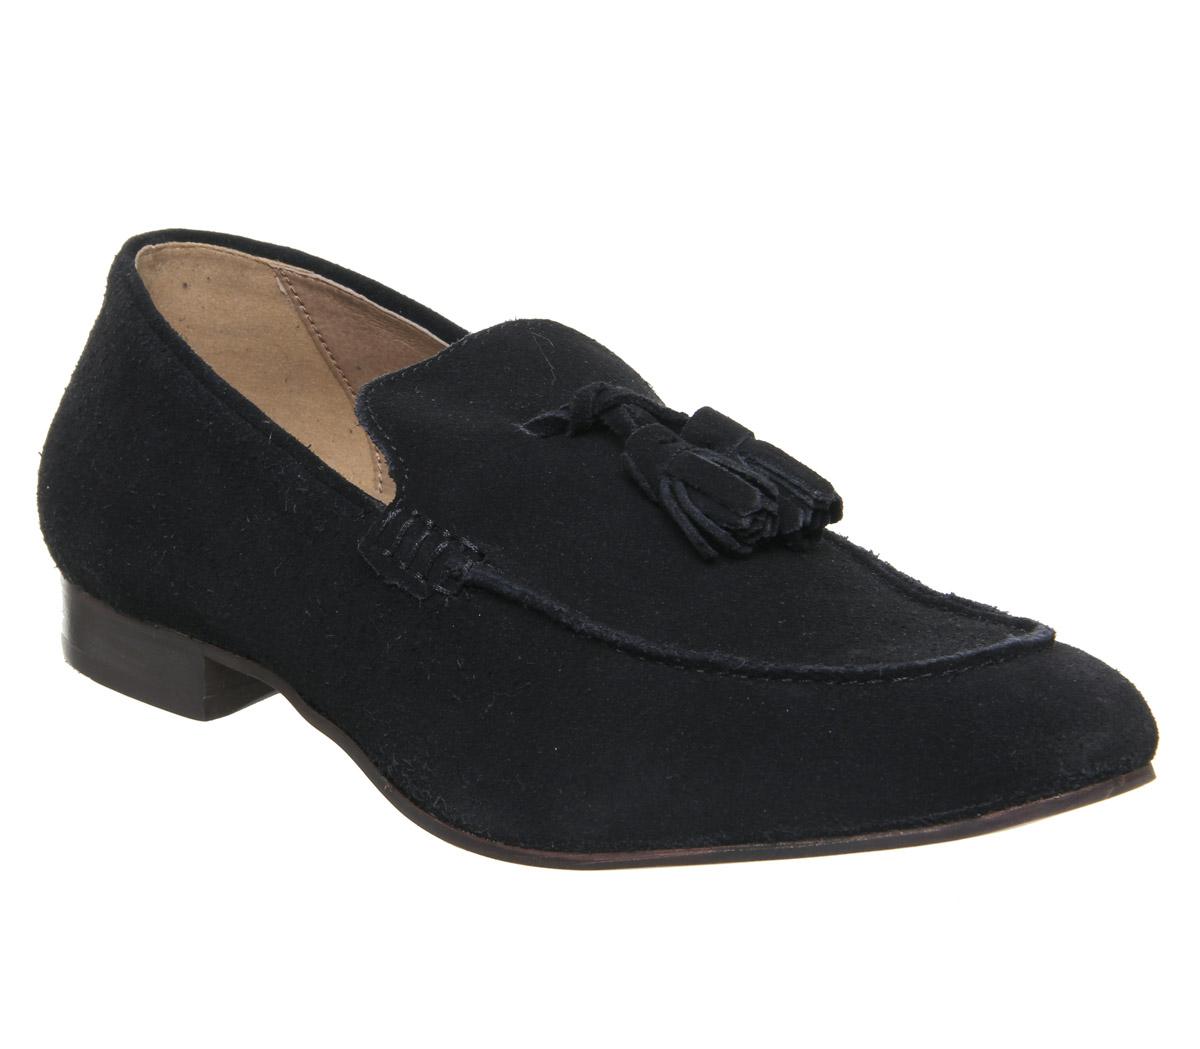 hudson suede loafers